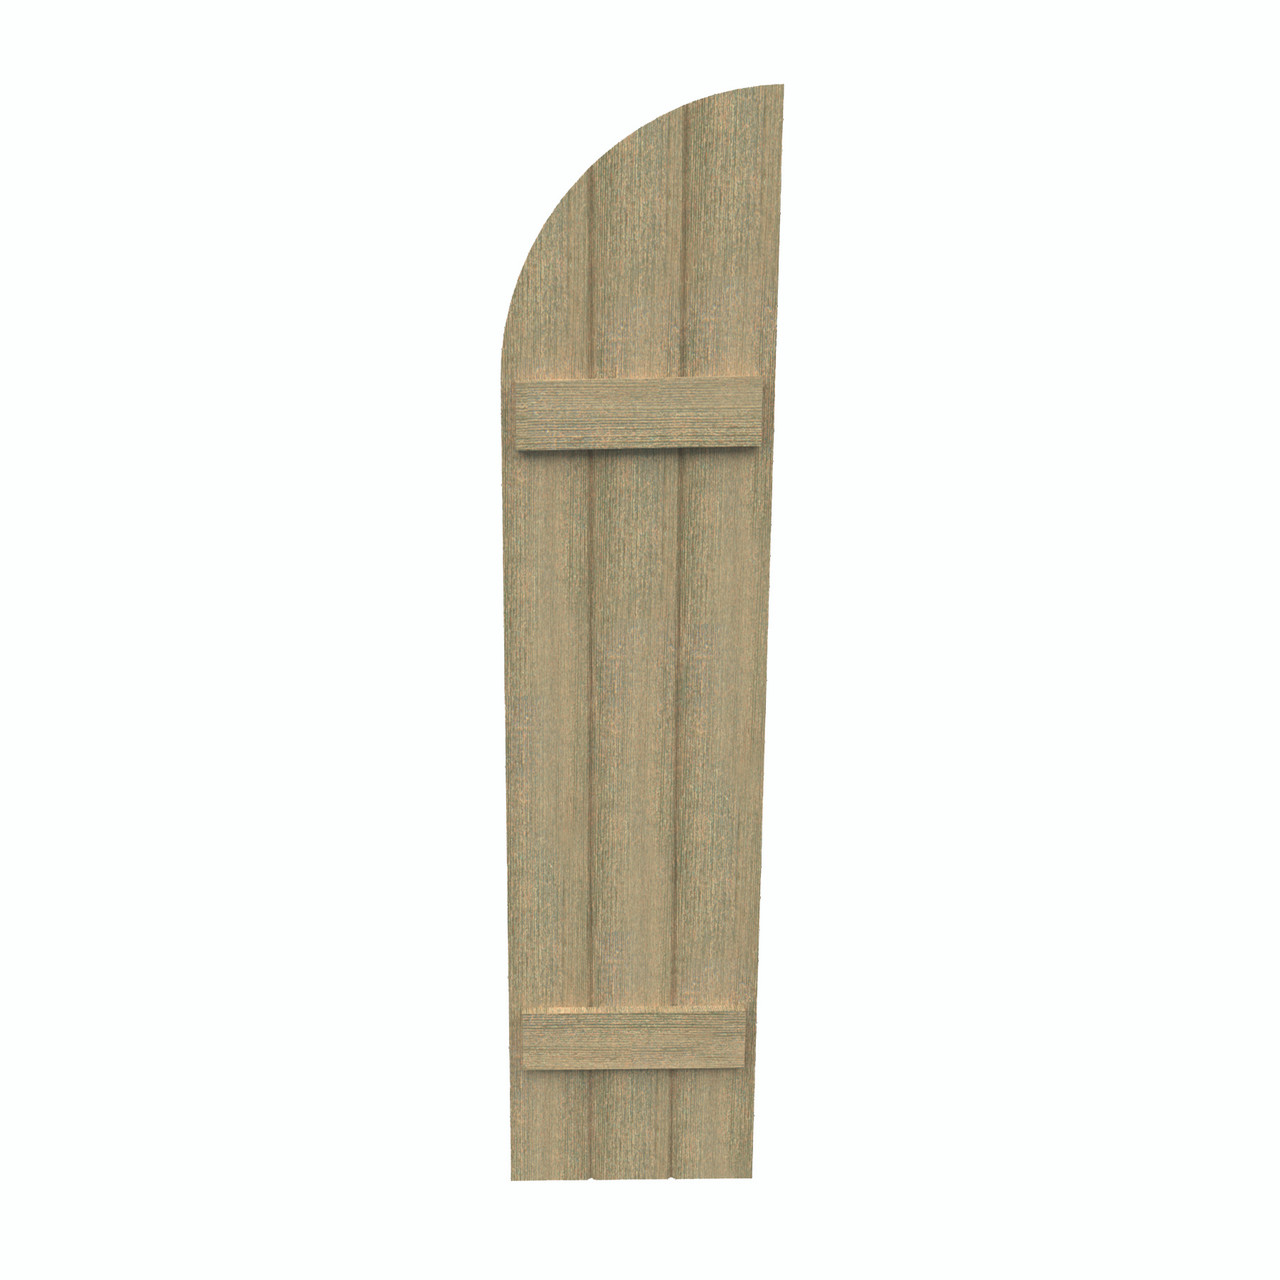 14 inch by 89 inch Quarter Round Shutter with 3-Boards